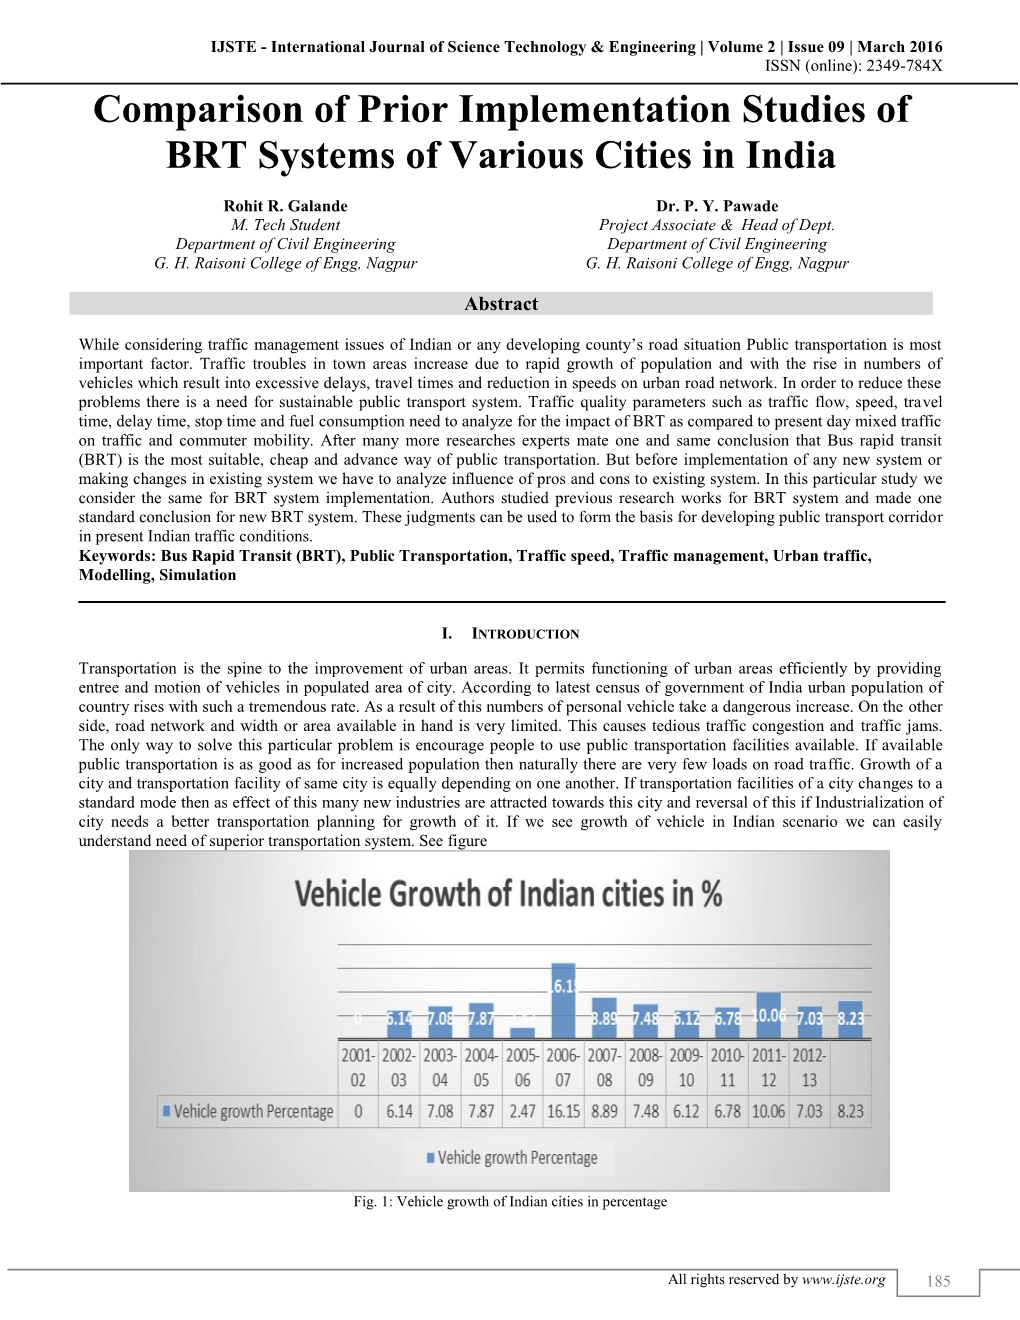 Comparison of Prior Implementation Studies of BRT Systems of Various Cities in India (IJSTE/ Volume 2 / Issue 09 / 033)